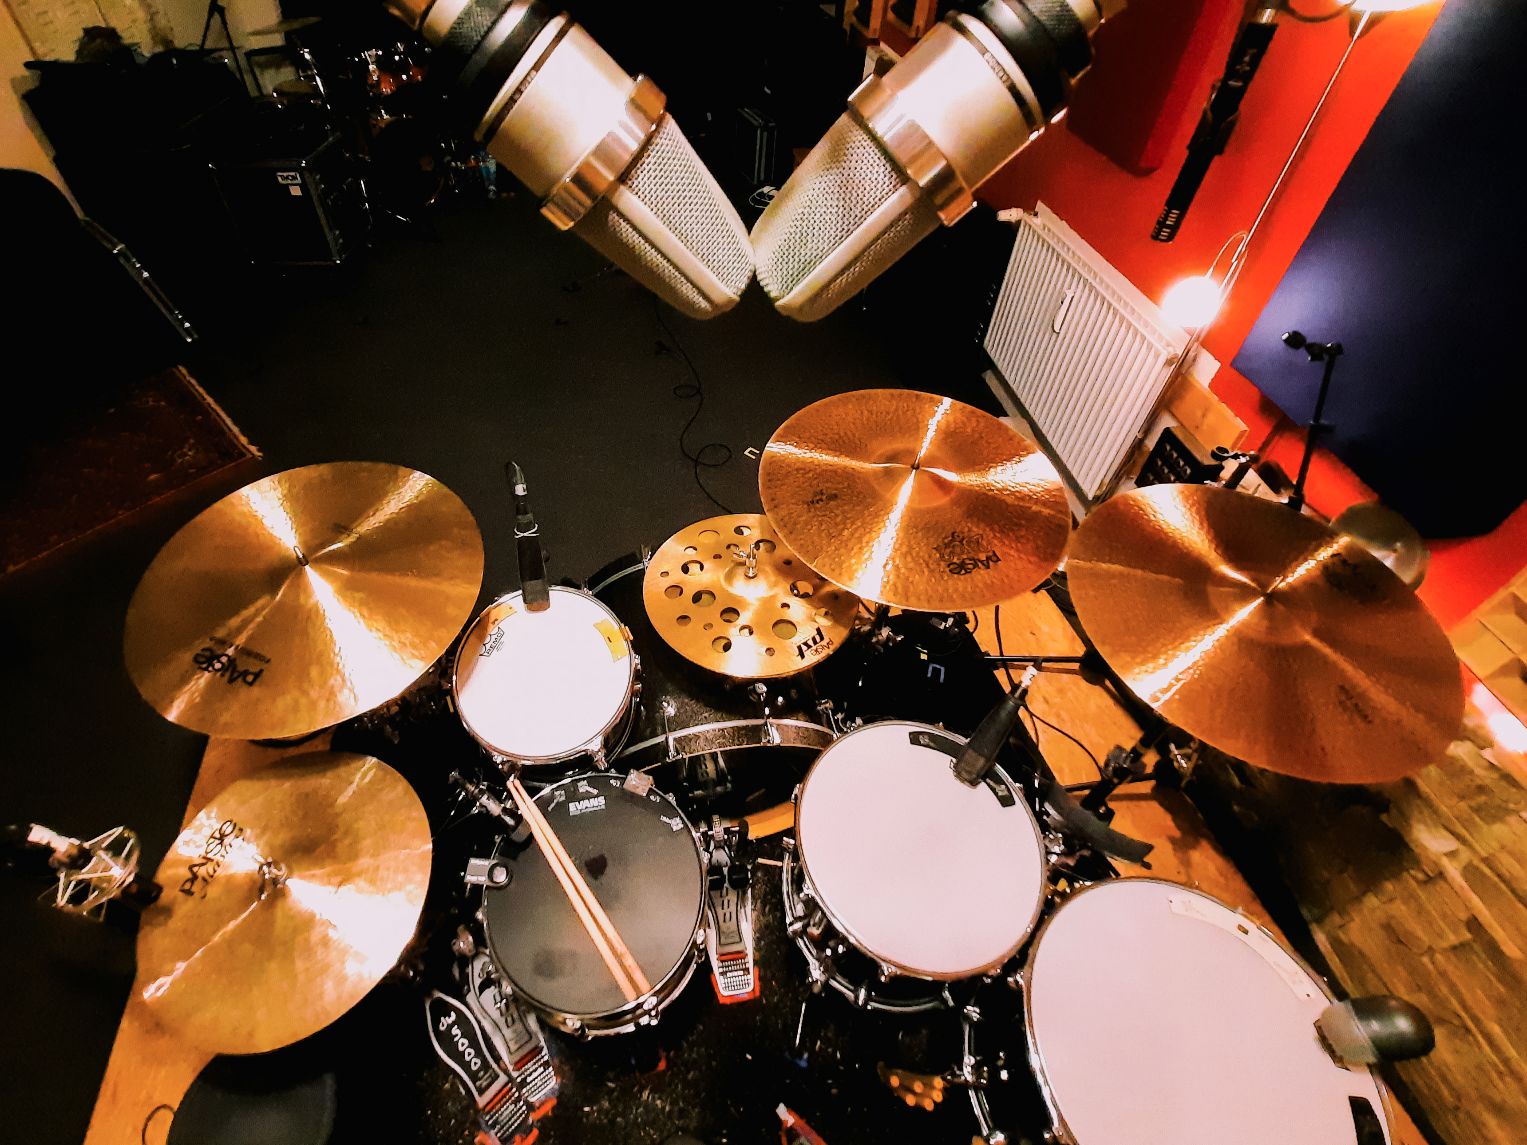 birds eye view of dw drums and Paiste cymbals at online studio drummer